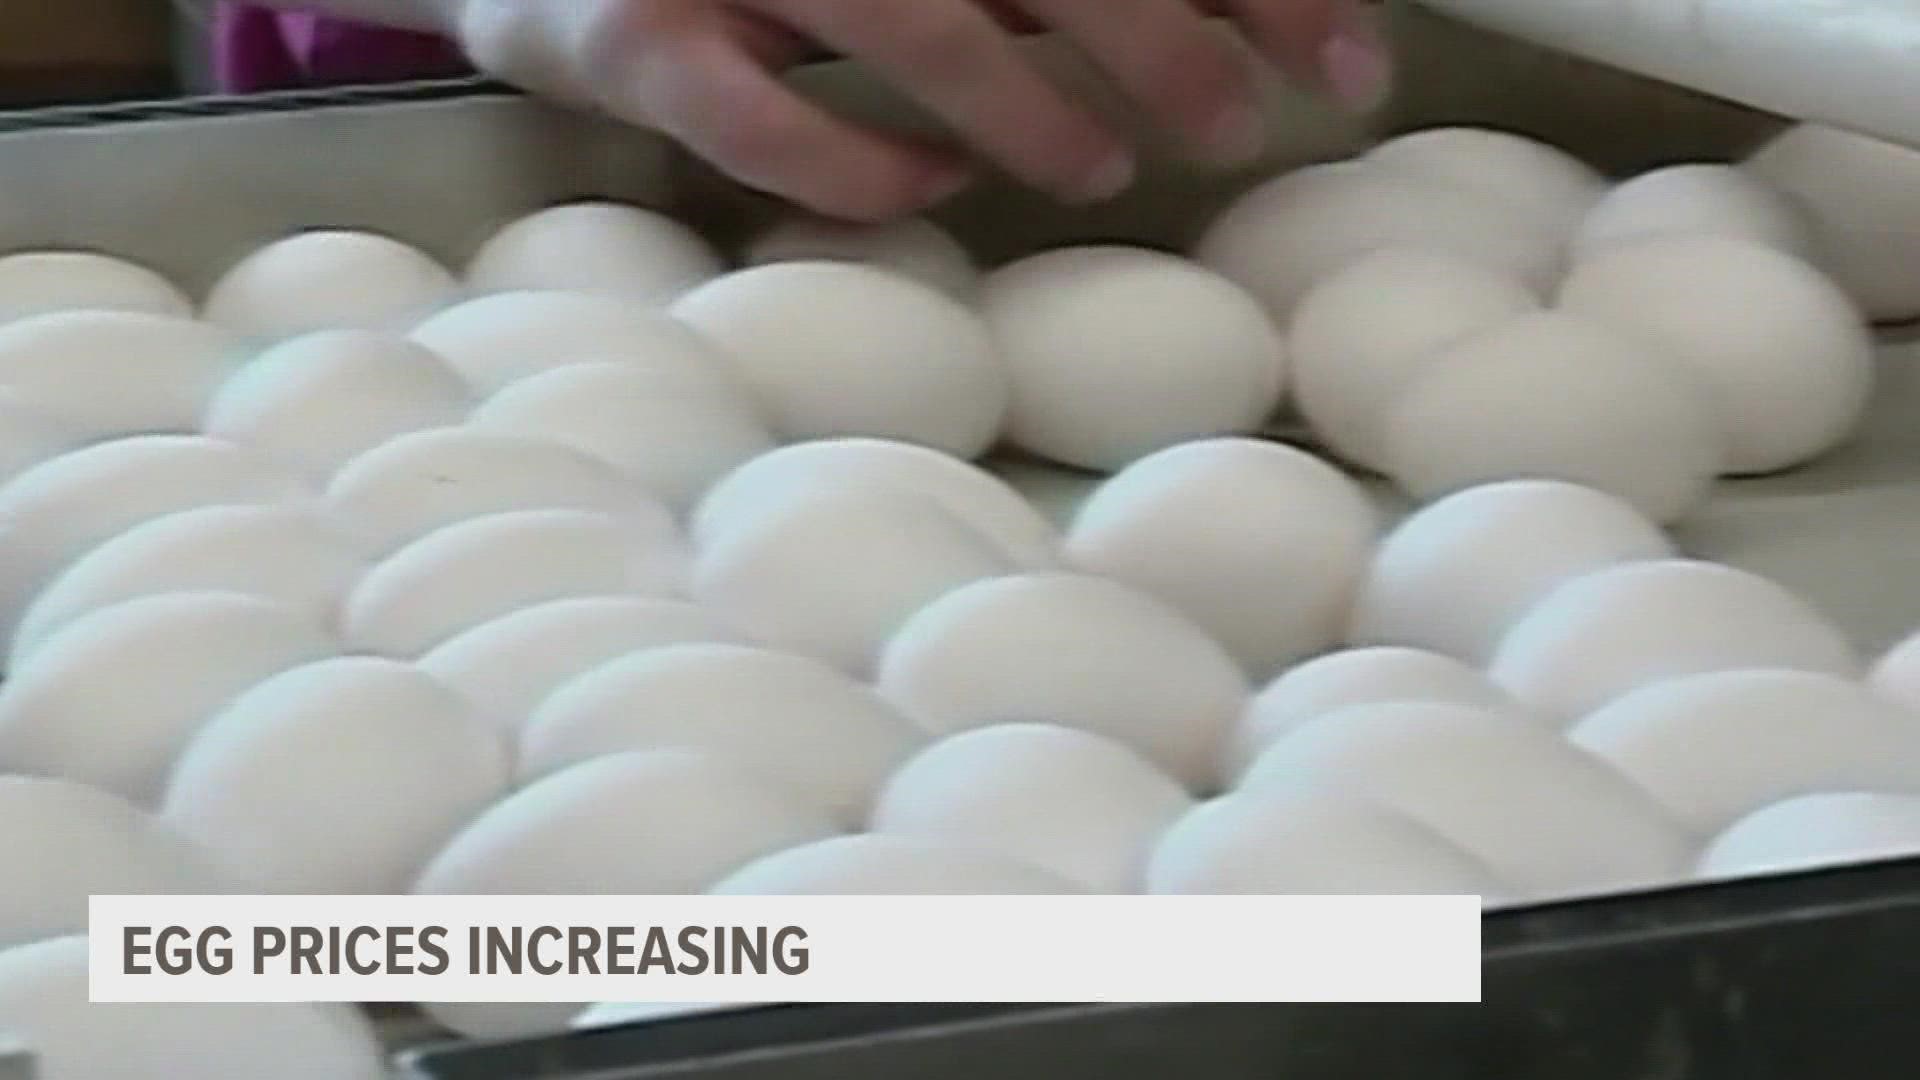 As egg prices increase one restaurant owner details how this is impacting her business.